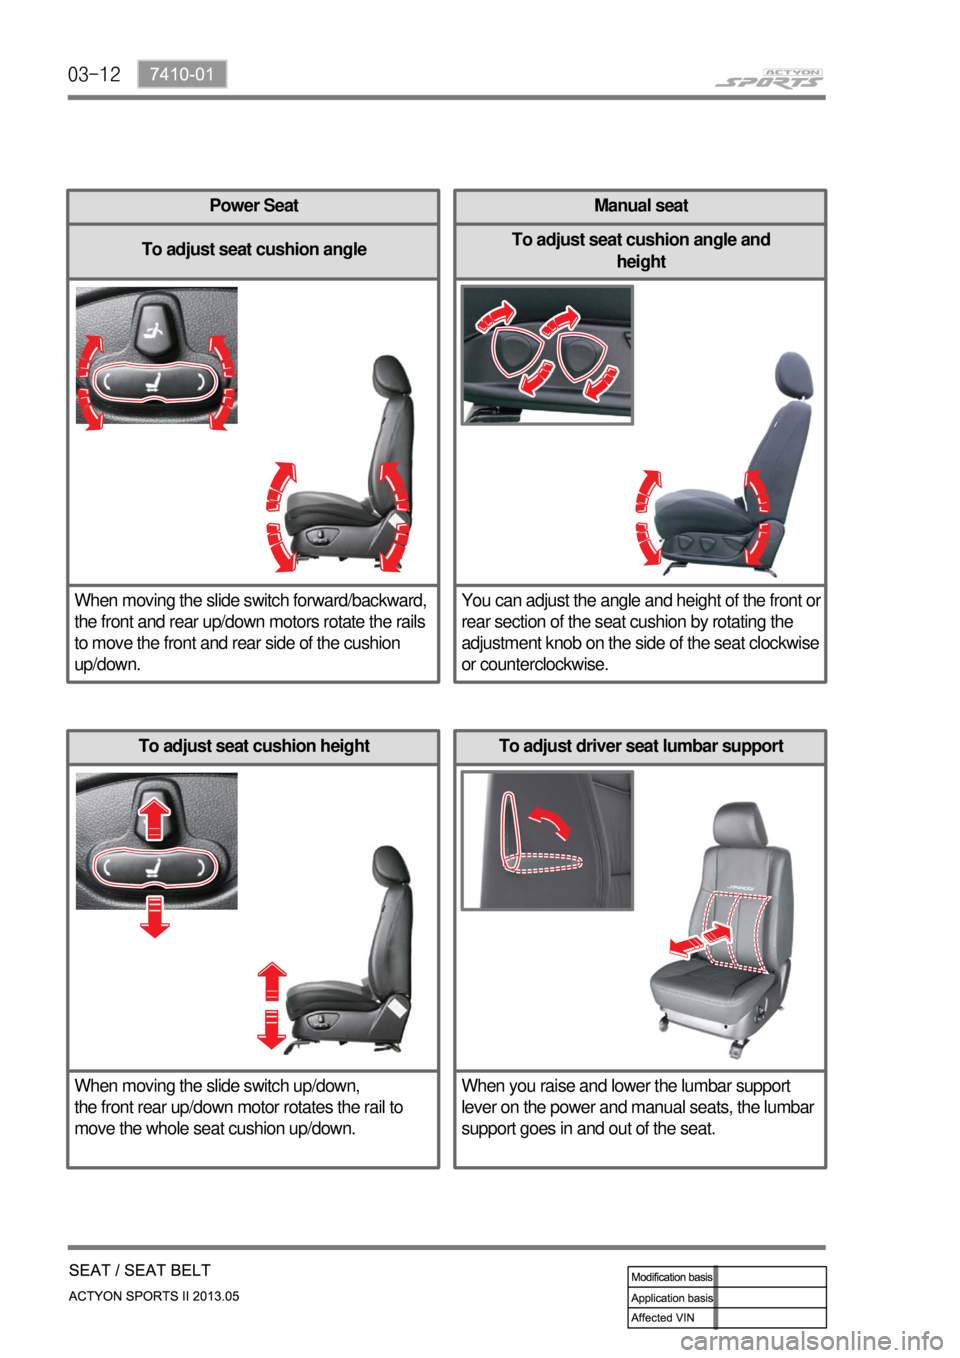 SSANGYONG NEW ACTYON SPORTS 2013  Service Manual 03-12
Power Seat
To adjust seat cushion angle
When moving the slide switch forward/backward, 
the front and rear up/down motors rotate the rails 
to move the front and rear side of the cushion 
up/dow